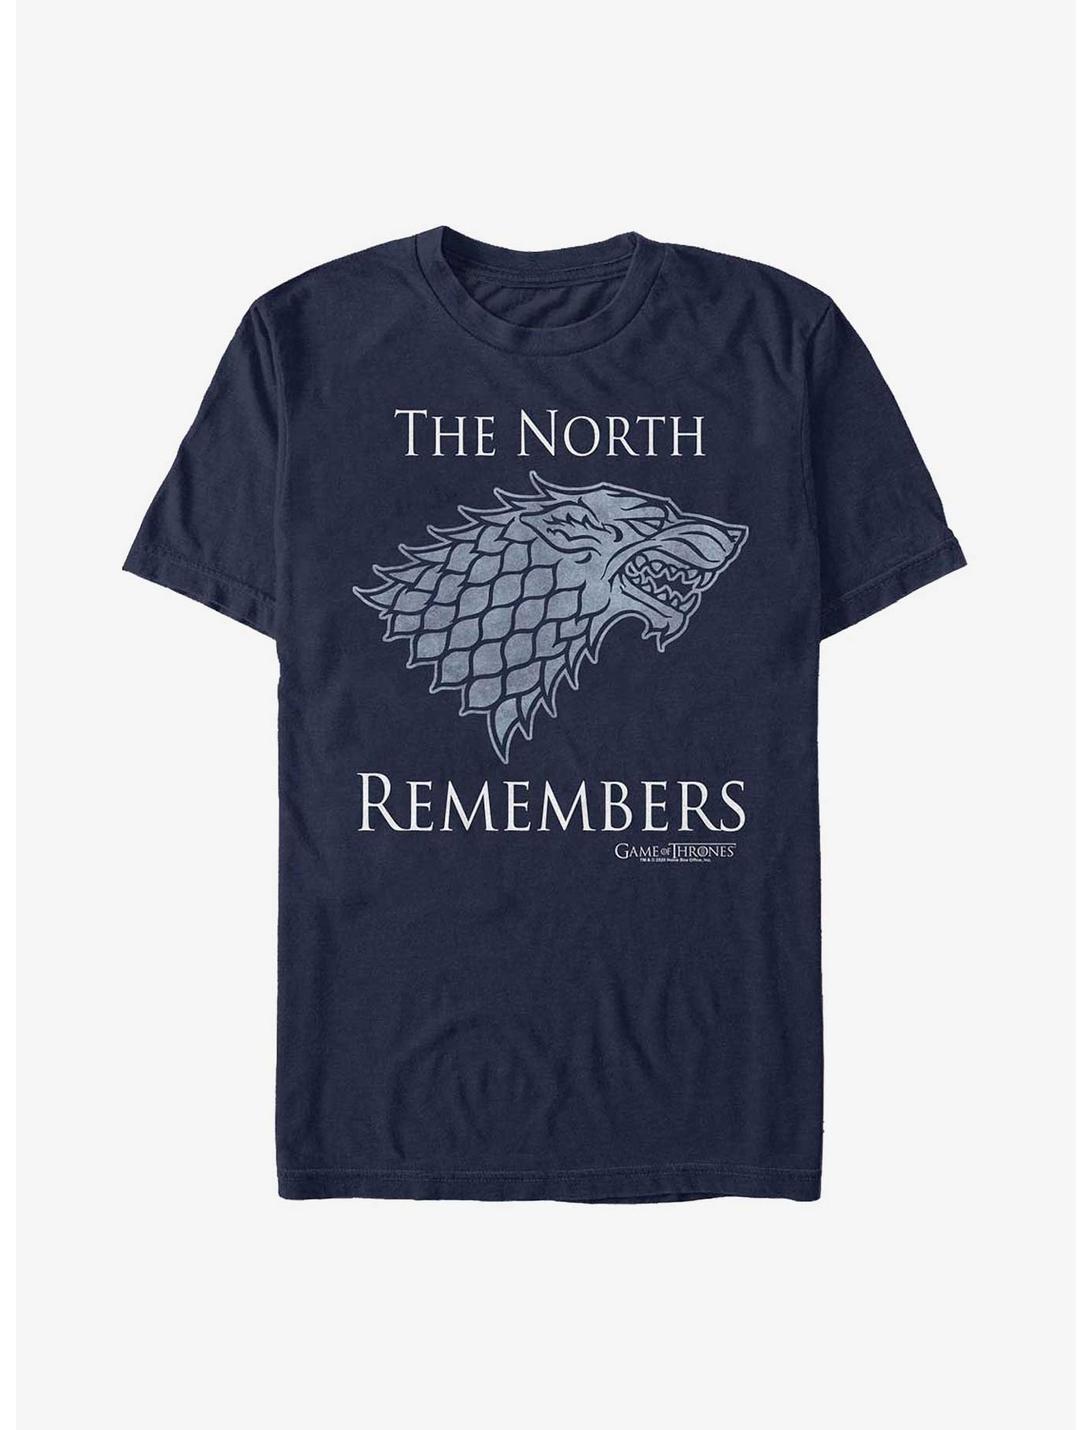 Plus Size Game Of Thrones The North Remembers T-Shirt, NAVY, hi-res